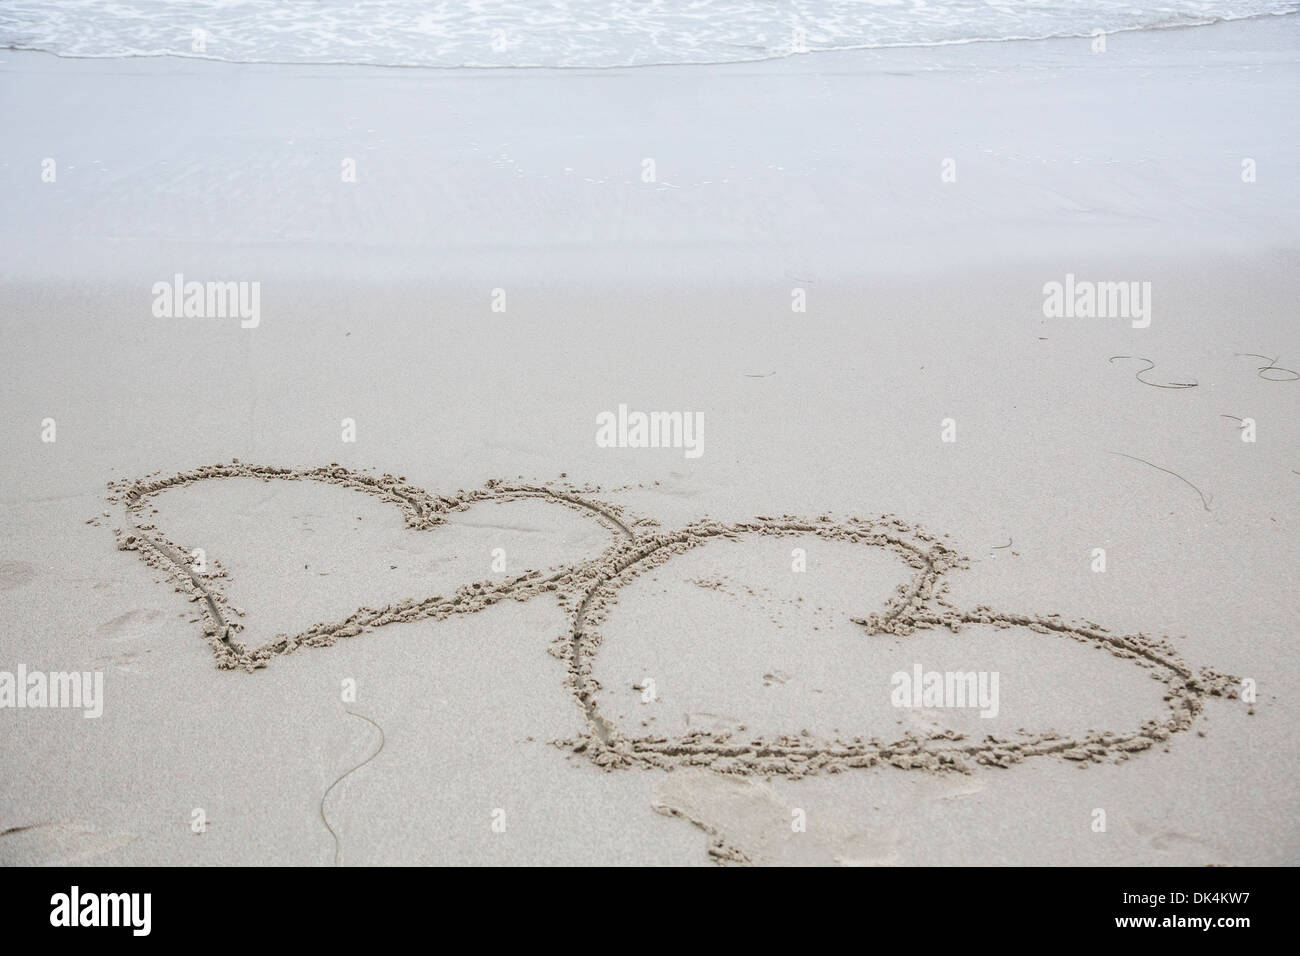 Two hearts carved into wet sand Stock Photo